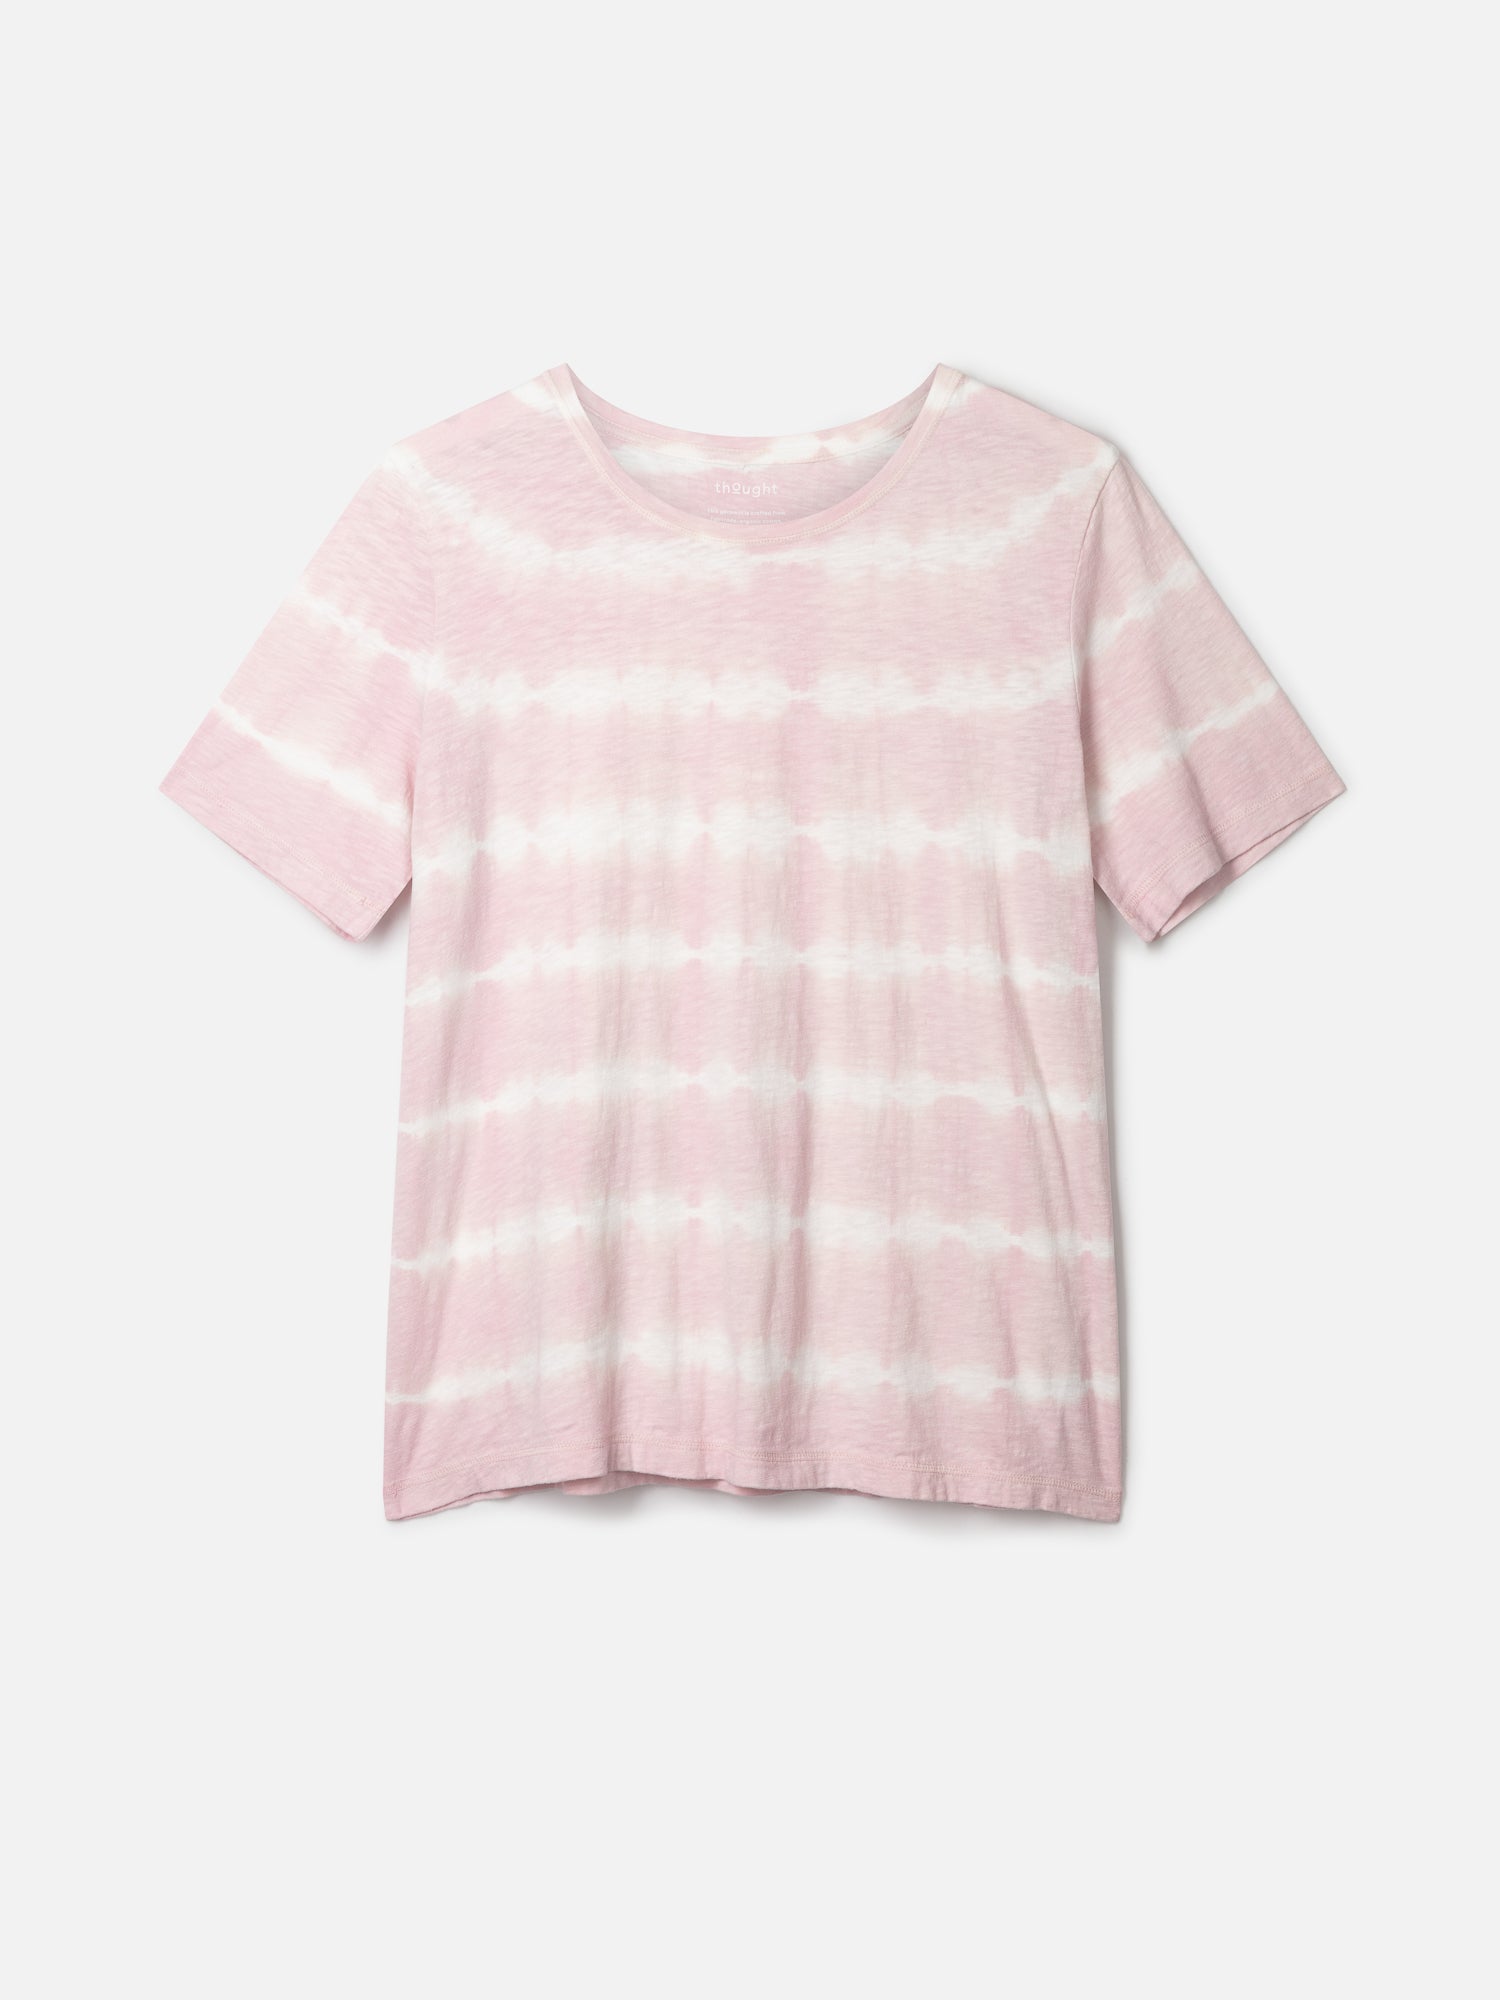 Fairtrade Organic Cotton Tie Dyed T-Shirt - Orchid Pink